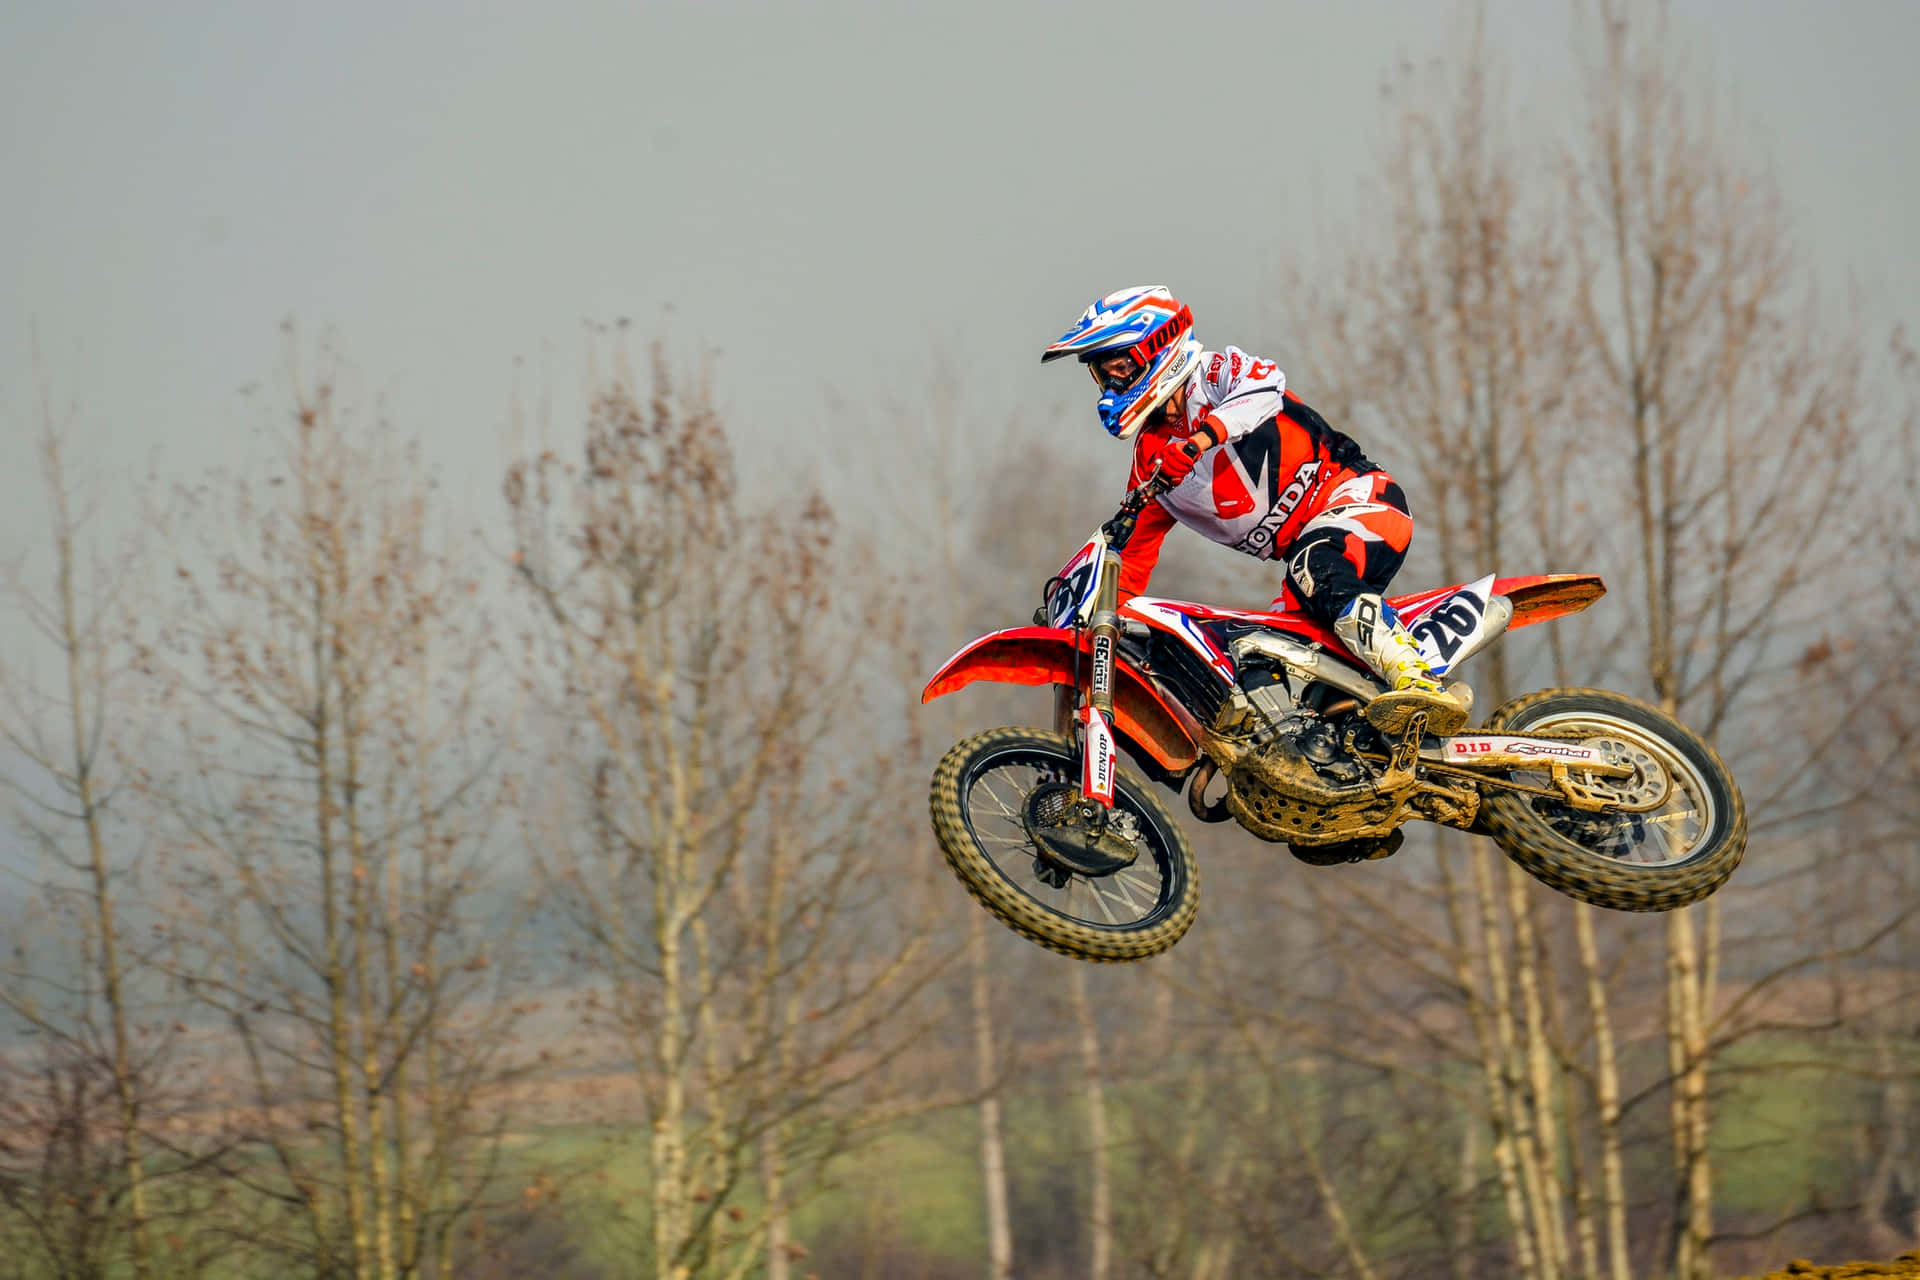 Adrenaline Rush: A Motocross Rider Soaring in the Air